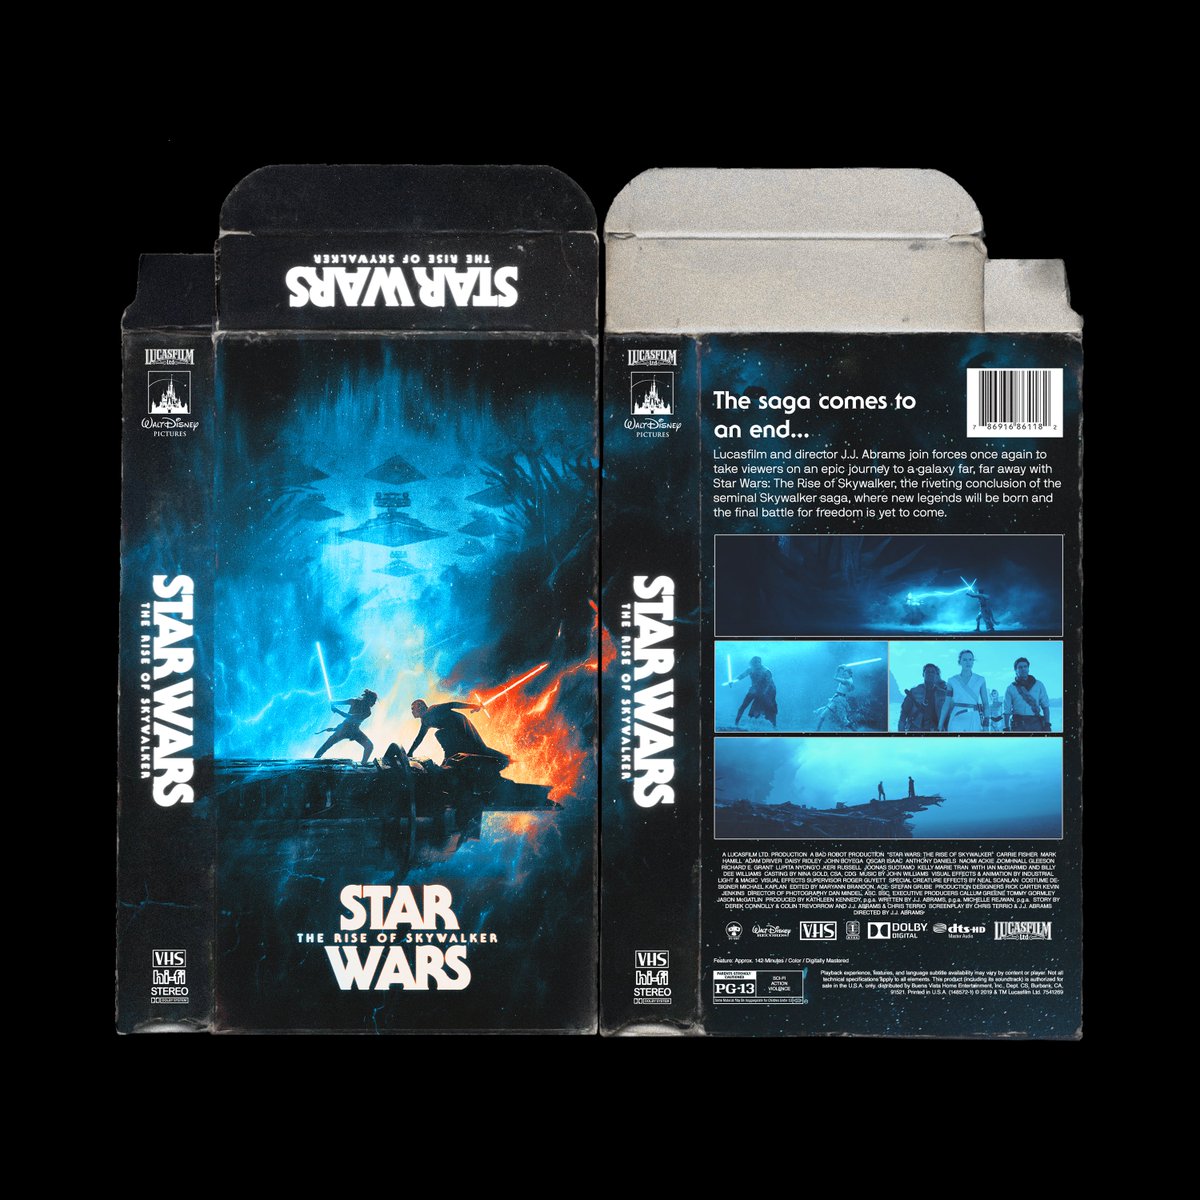 finally diving into movie poster design here are some custom star wars VHS designs in honour of may 4th!!